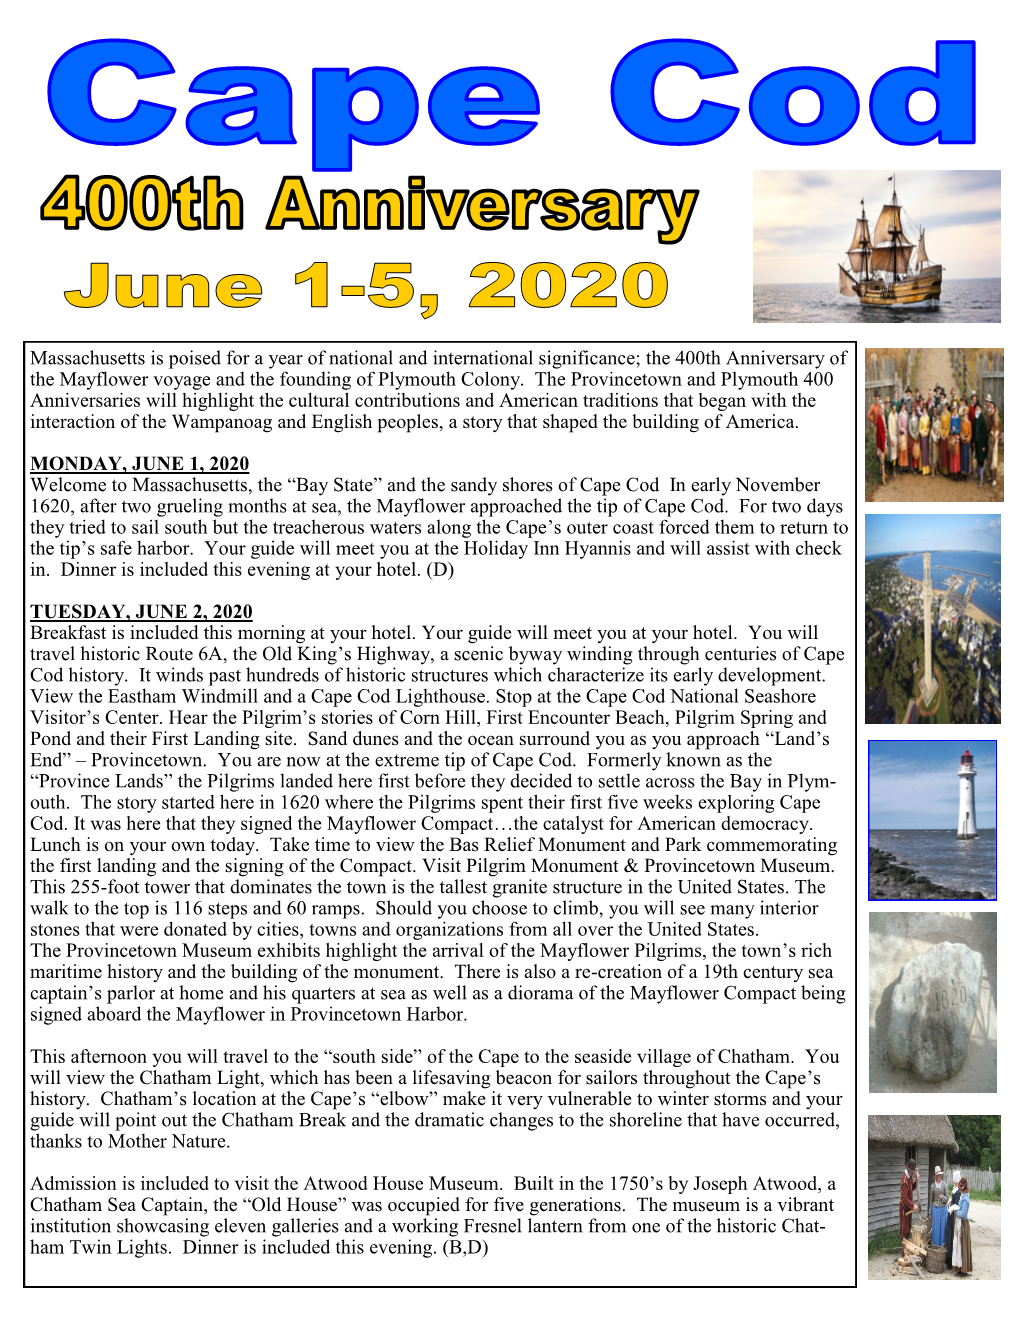 The 400Th Anniversary of the Mayflower Voyage and the Founding of Plymouth Colony